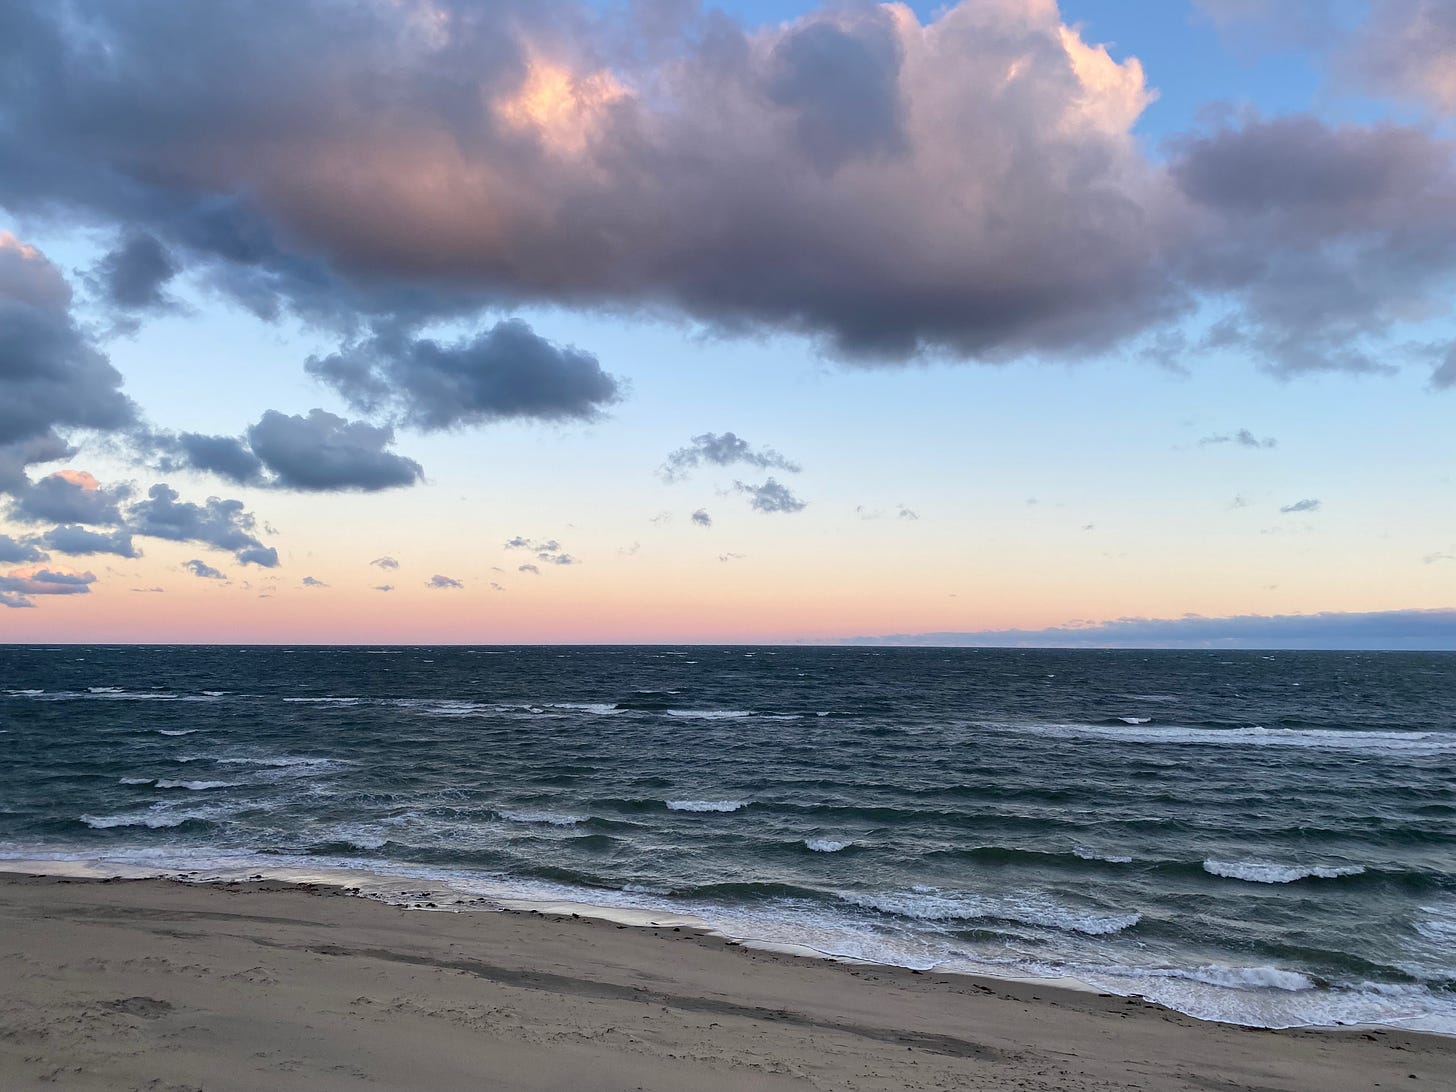 View of the beach at sunrise. The ocean is deep blue and ruffled with waves. The sky is pink on the horizon, then gold, then pale blue, then deep blue. There are big dark pink and grey clouds.